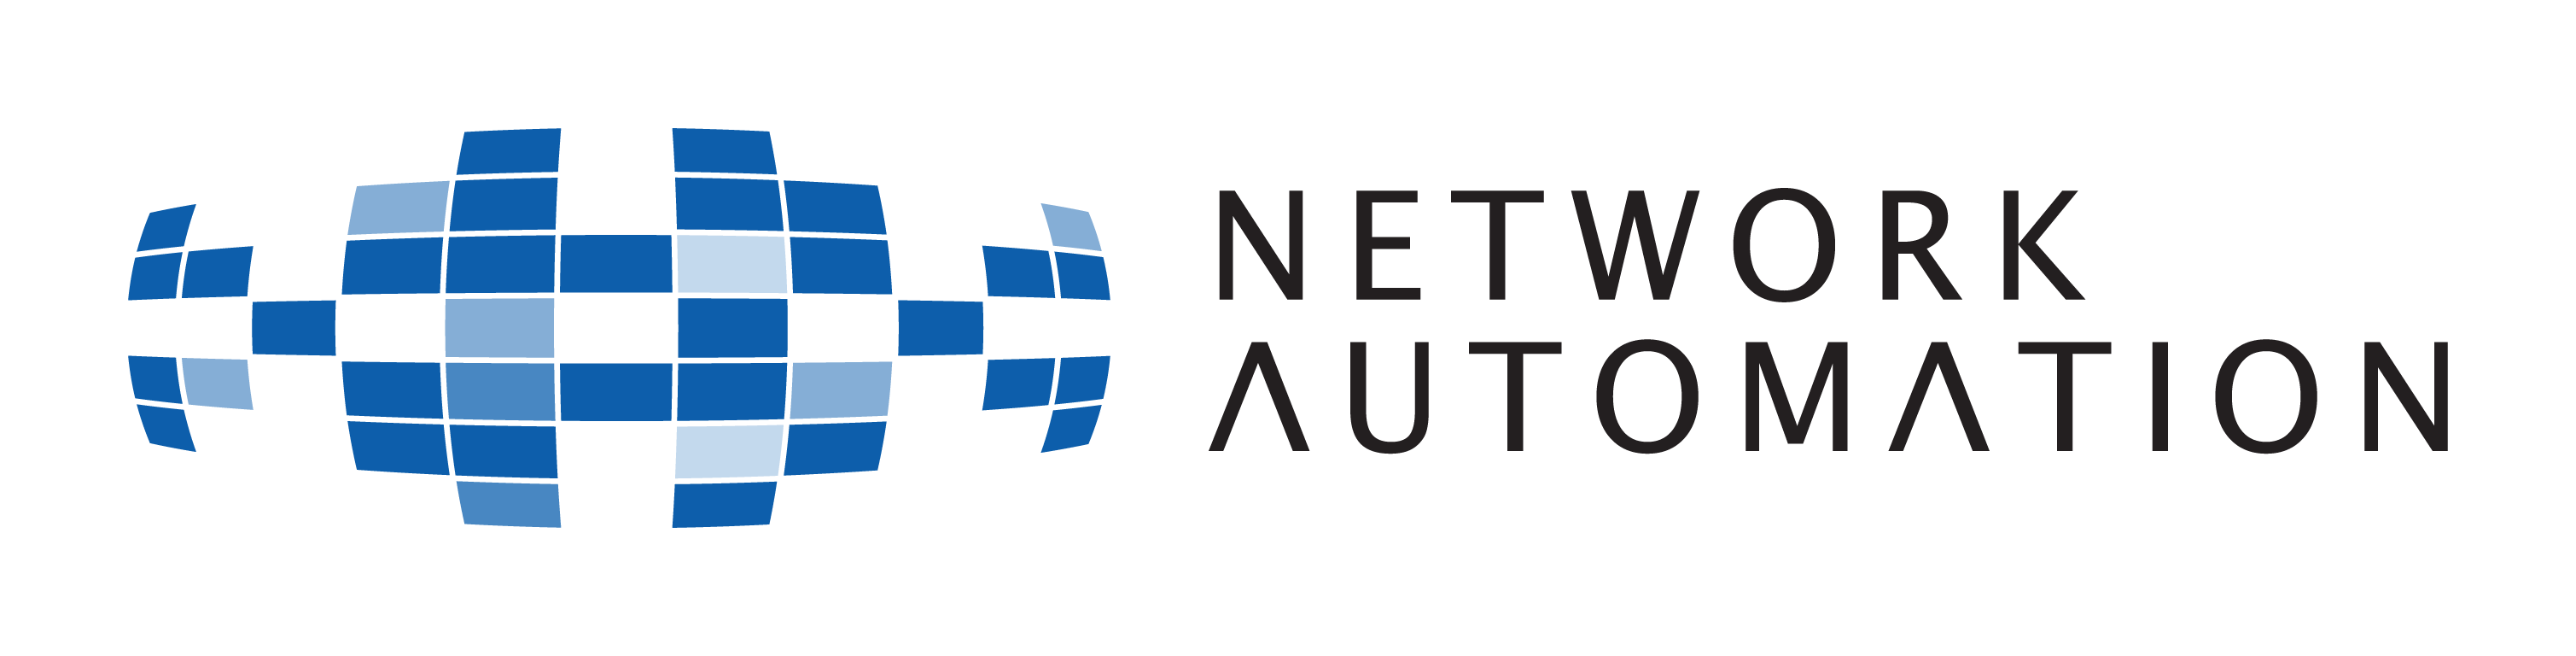  Network Automation